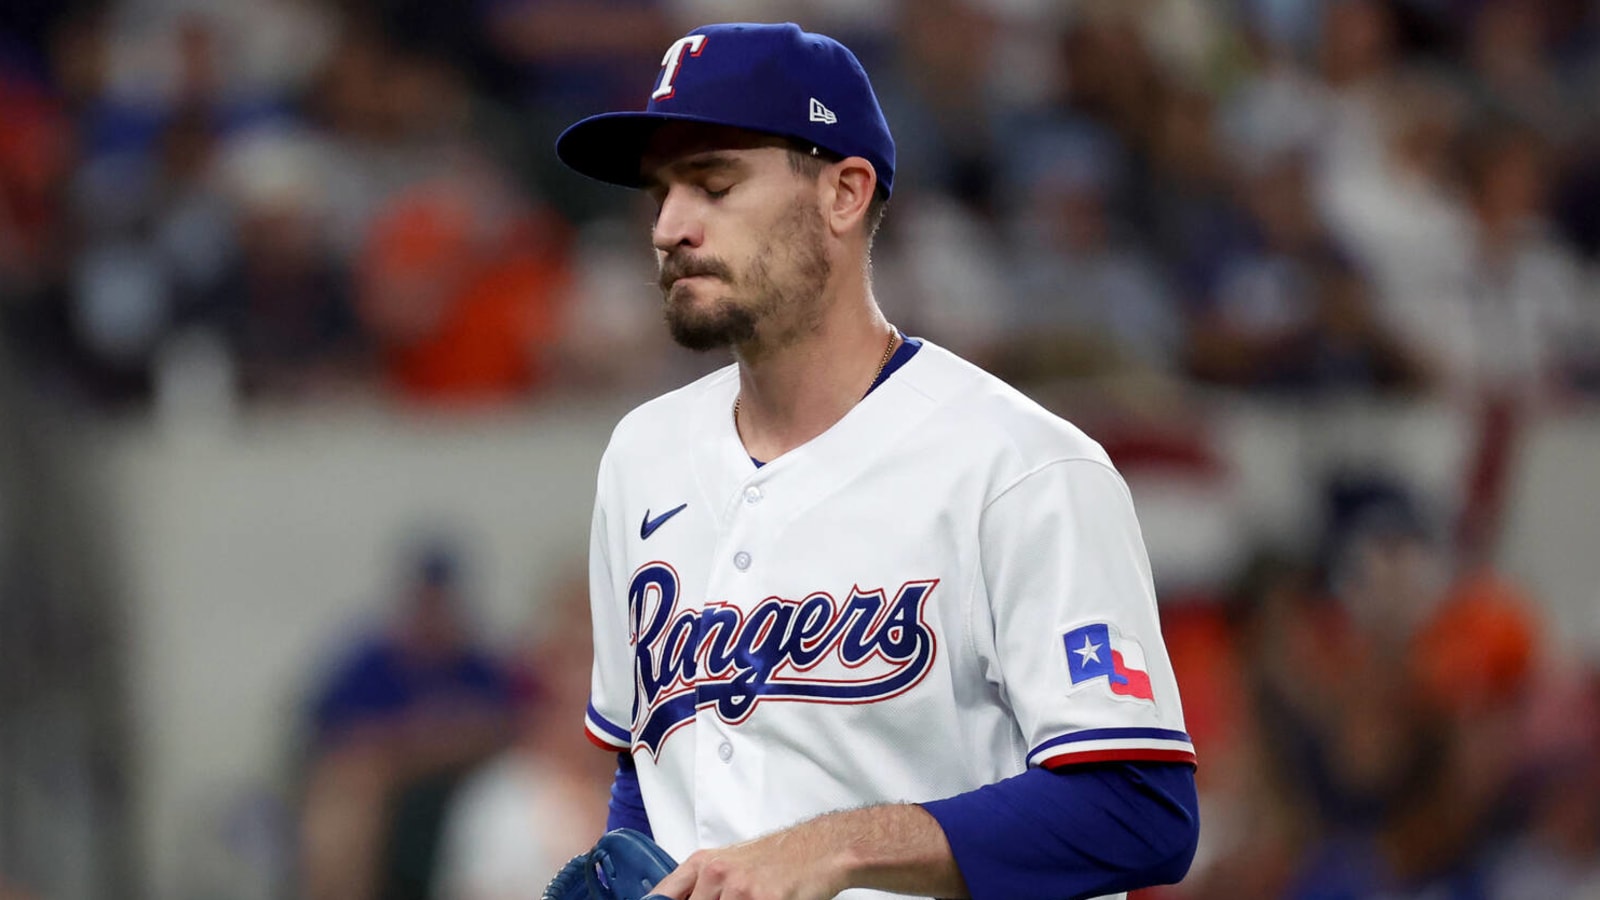 Rangers keeping two reliable veteran arms